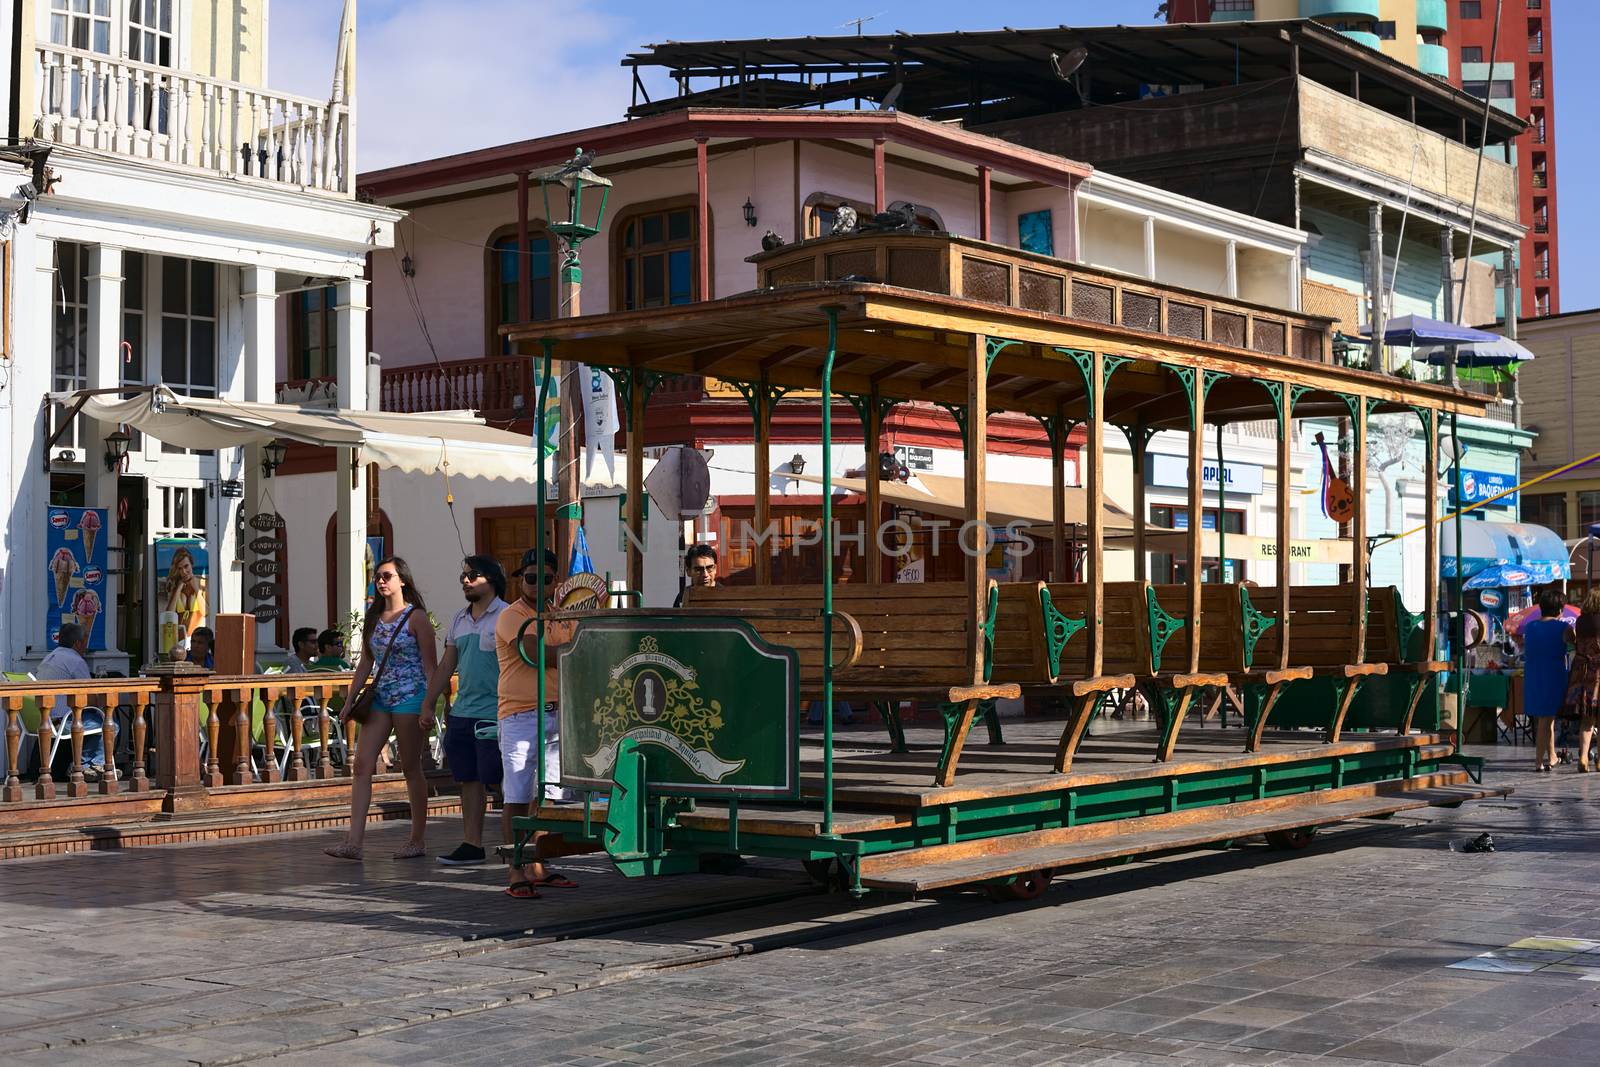 IQUIQUE, CHILE - JANUARY 22, 2015: Unidentified people around an old open tram waggon with wooden seats on Plaza Prat main square along Baquedano avenue on January 22, 2015 in Iquique, Chile